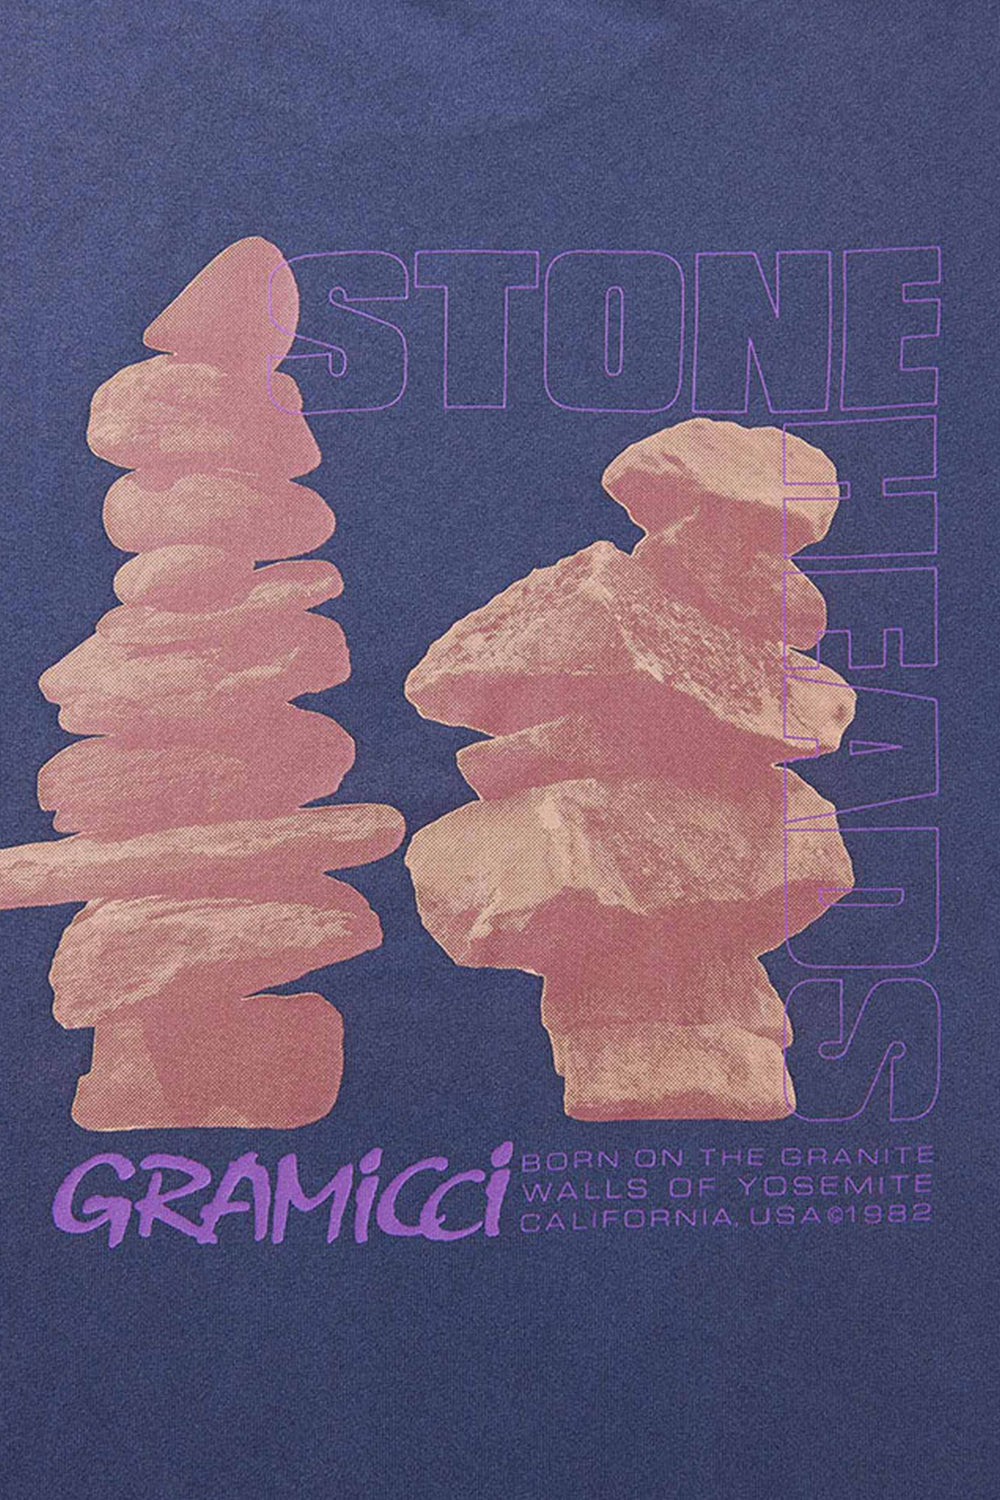 Gramicci Stoneheads T-Shirt (Navy Pigment) | Number Six